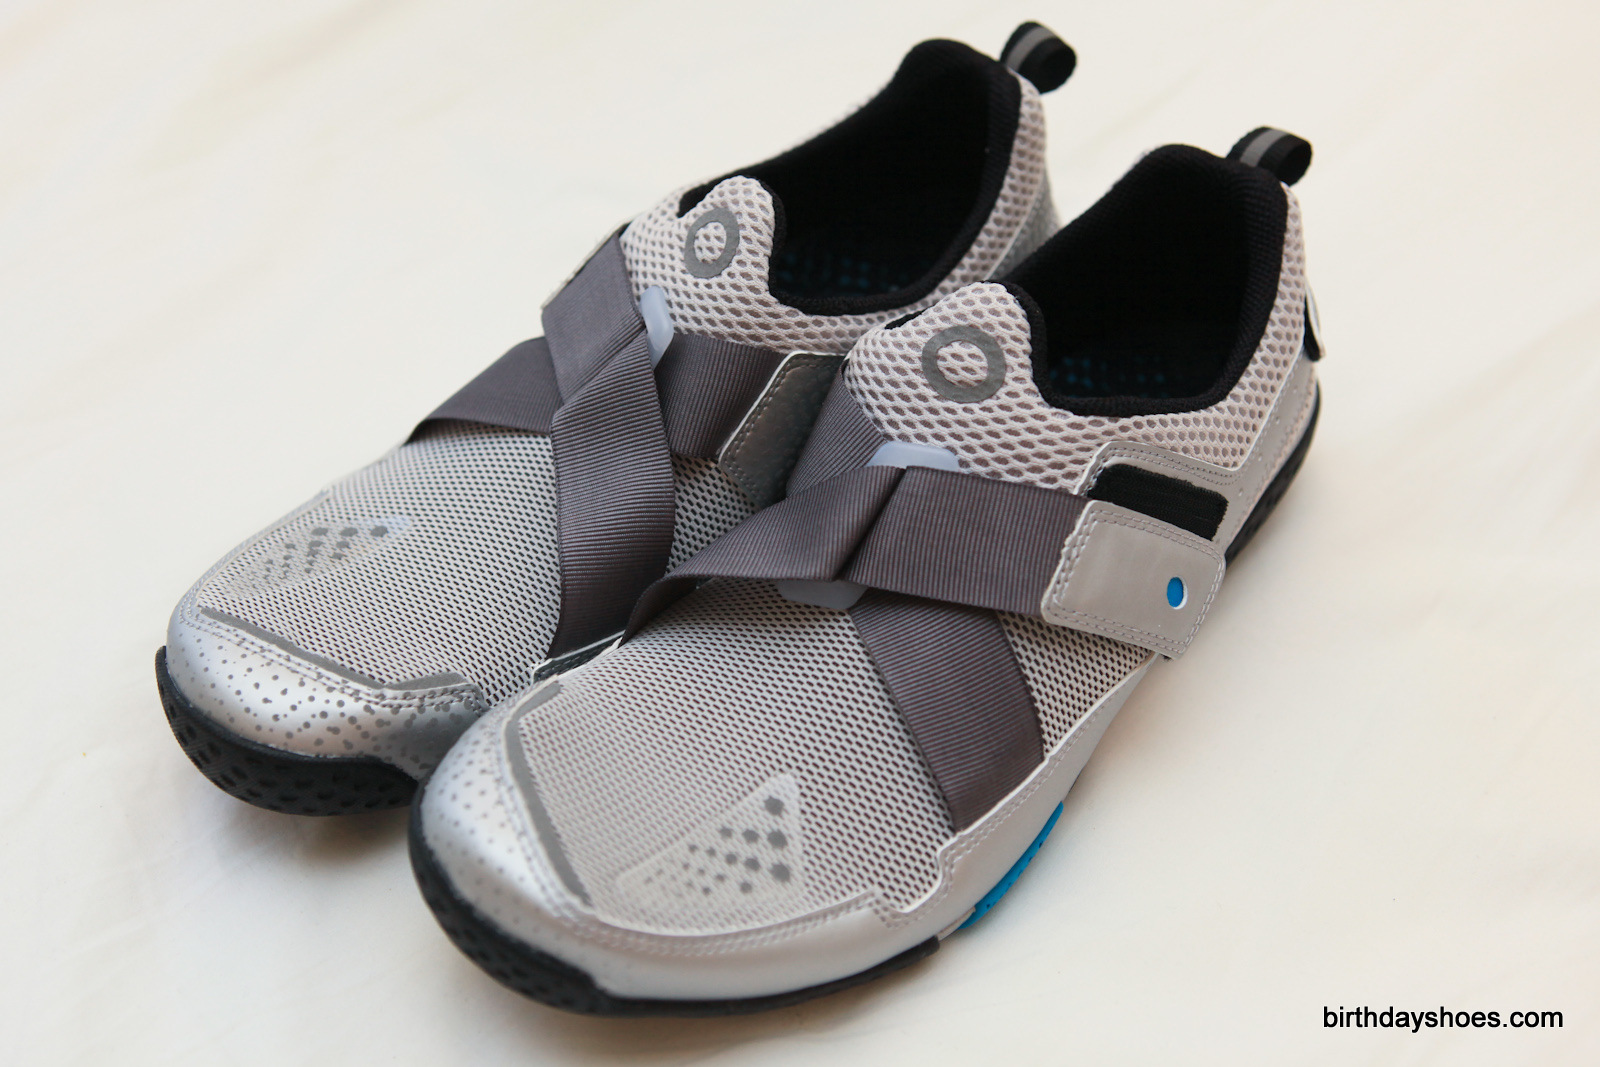 SKORA BASE & FORM Review - Birthday Shoes - Toe Shoes, Barefoot or ...